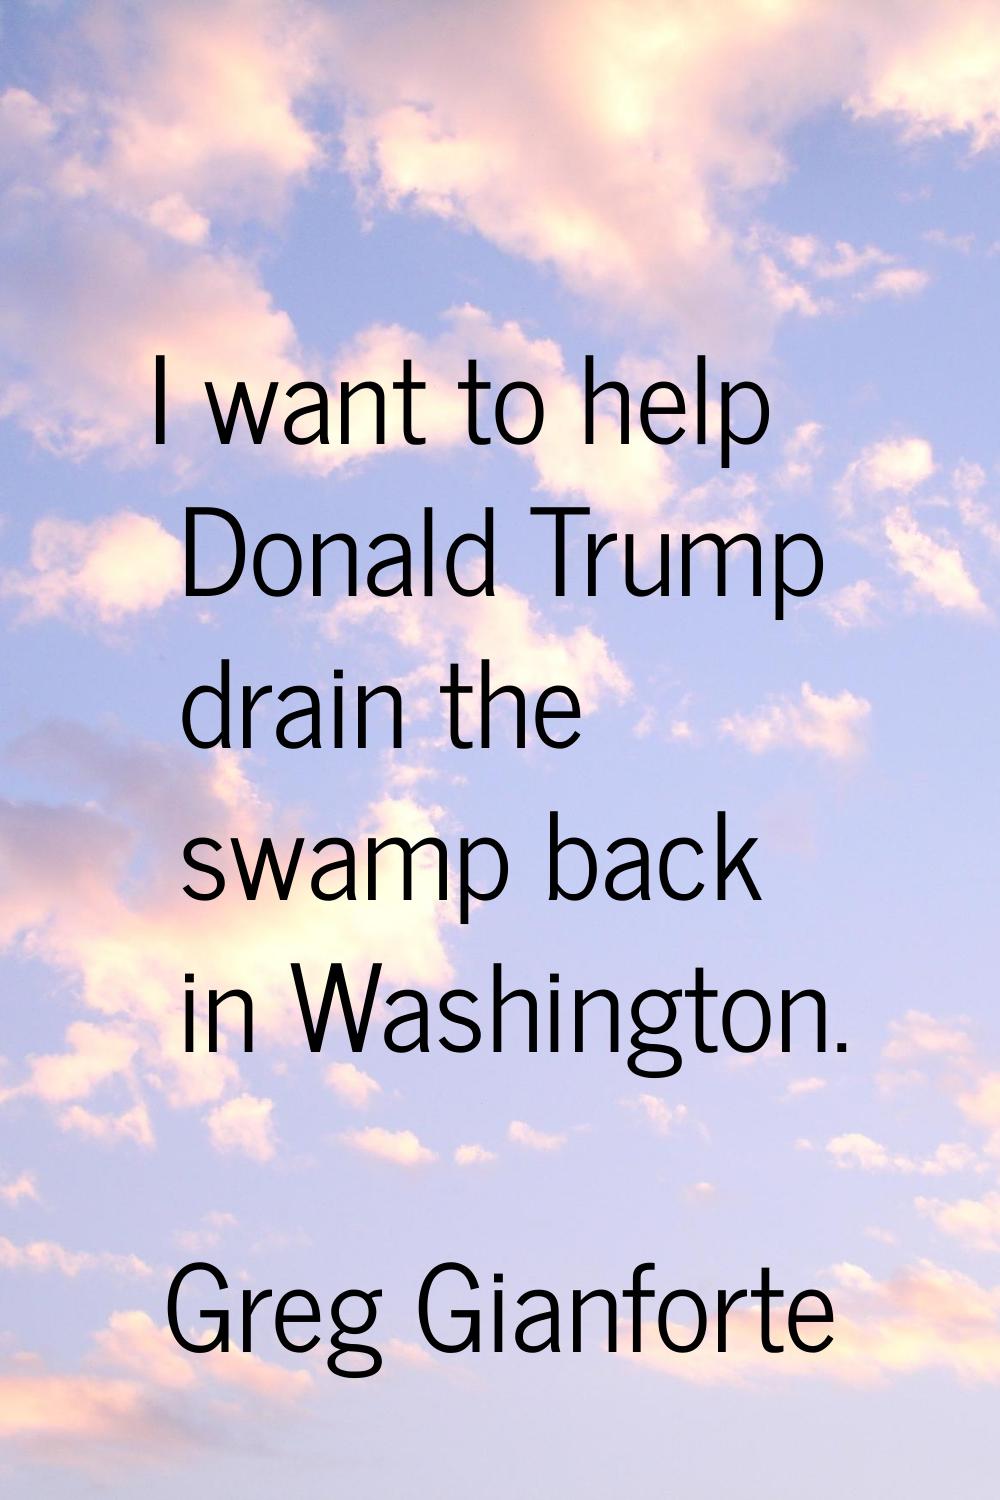 I want to help Donald Trump drain the swamp back in Washington.